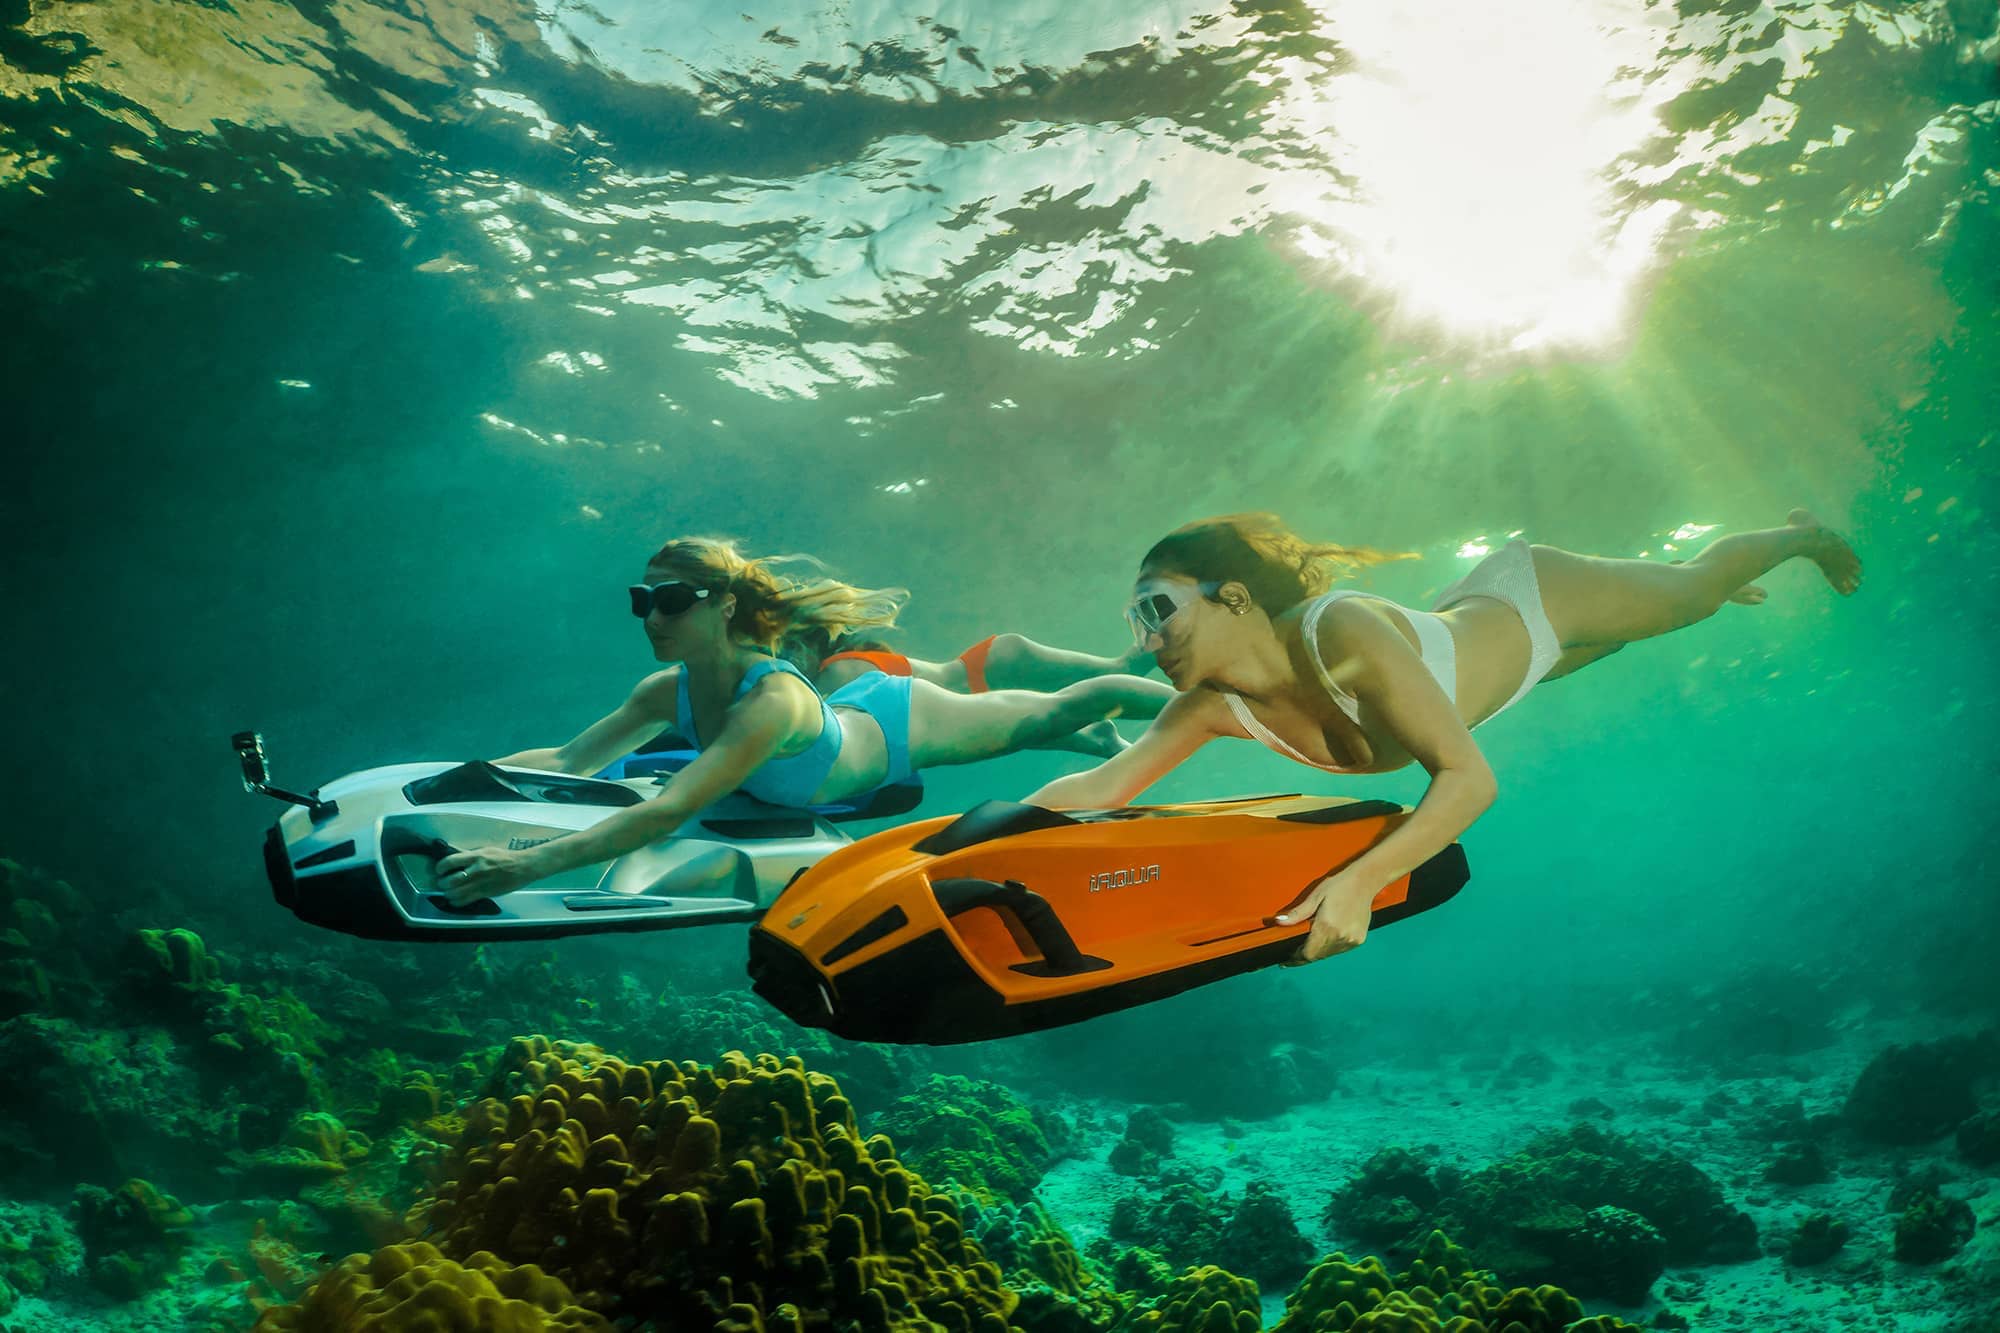 2 women swimming with iAqua scooter exploring the ocean.